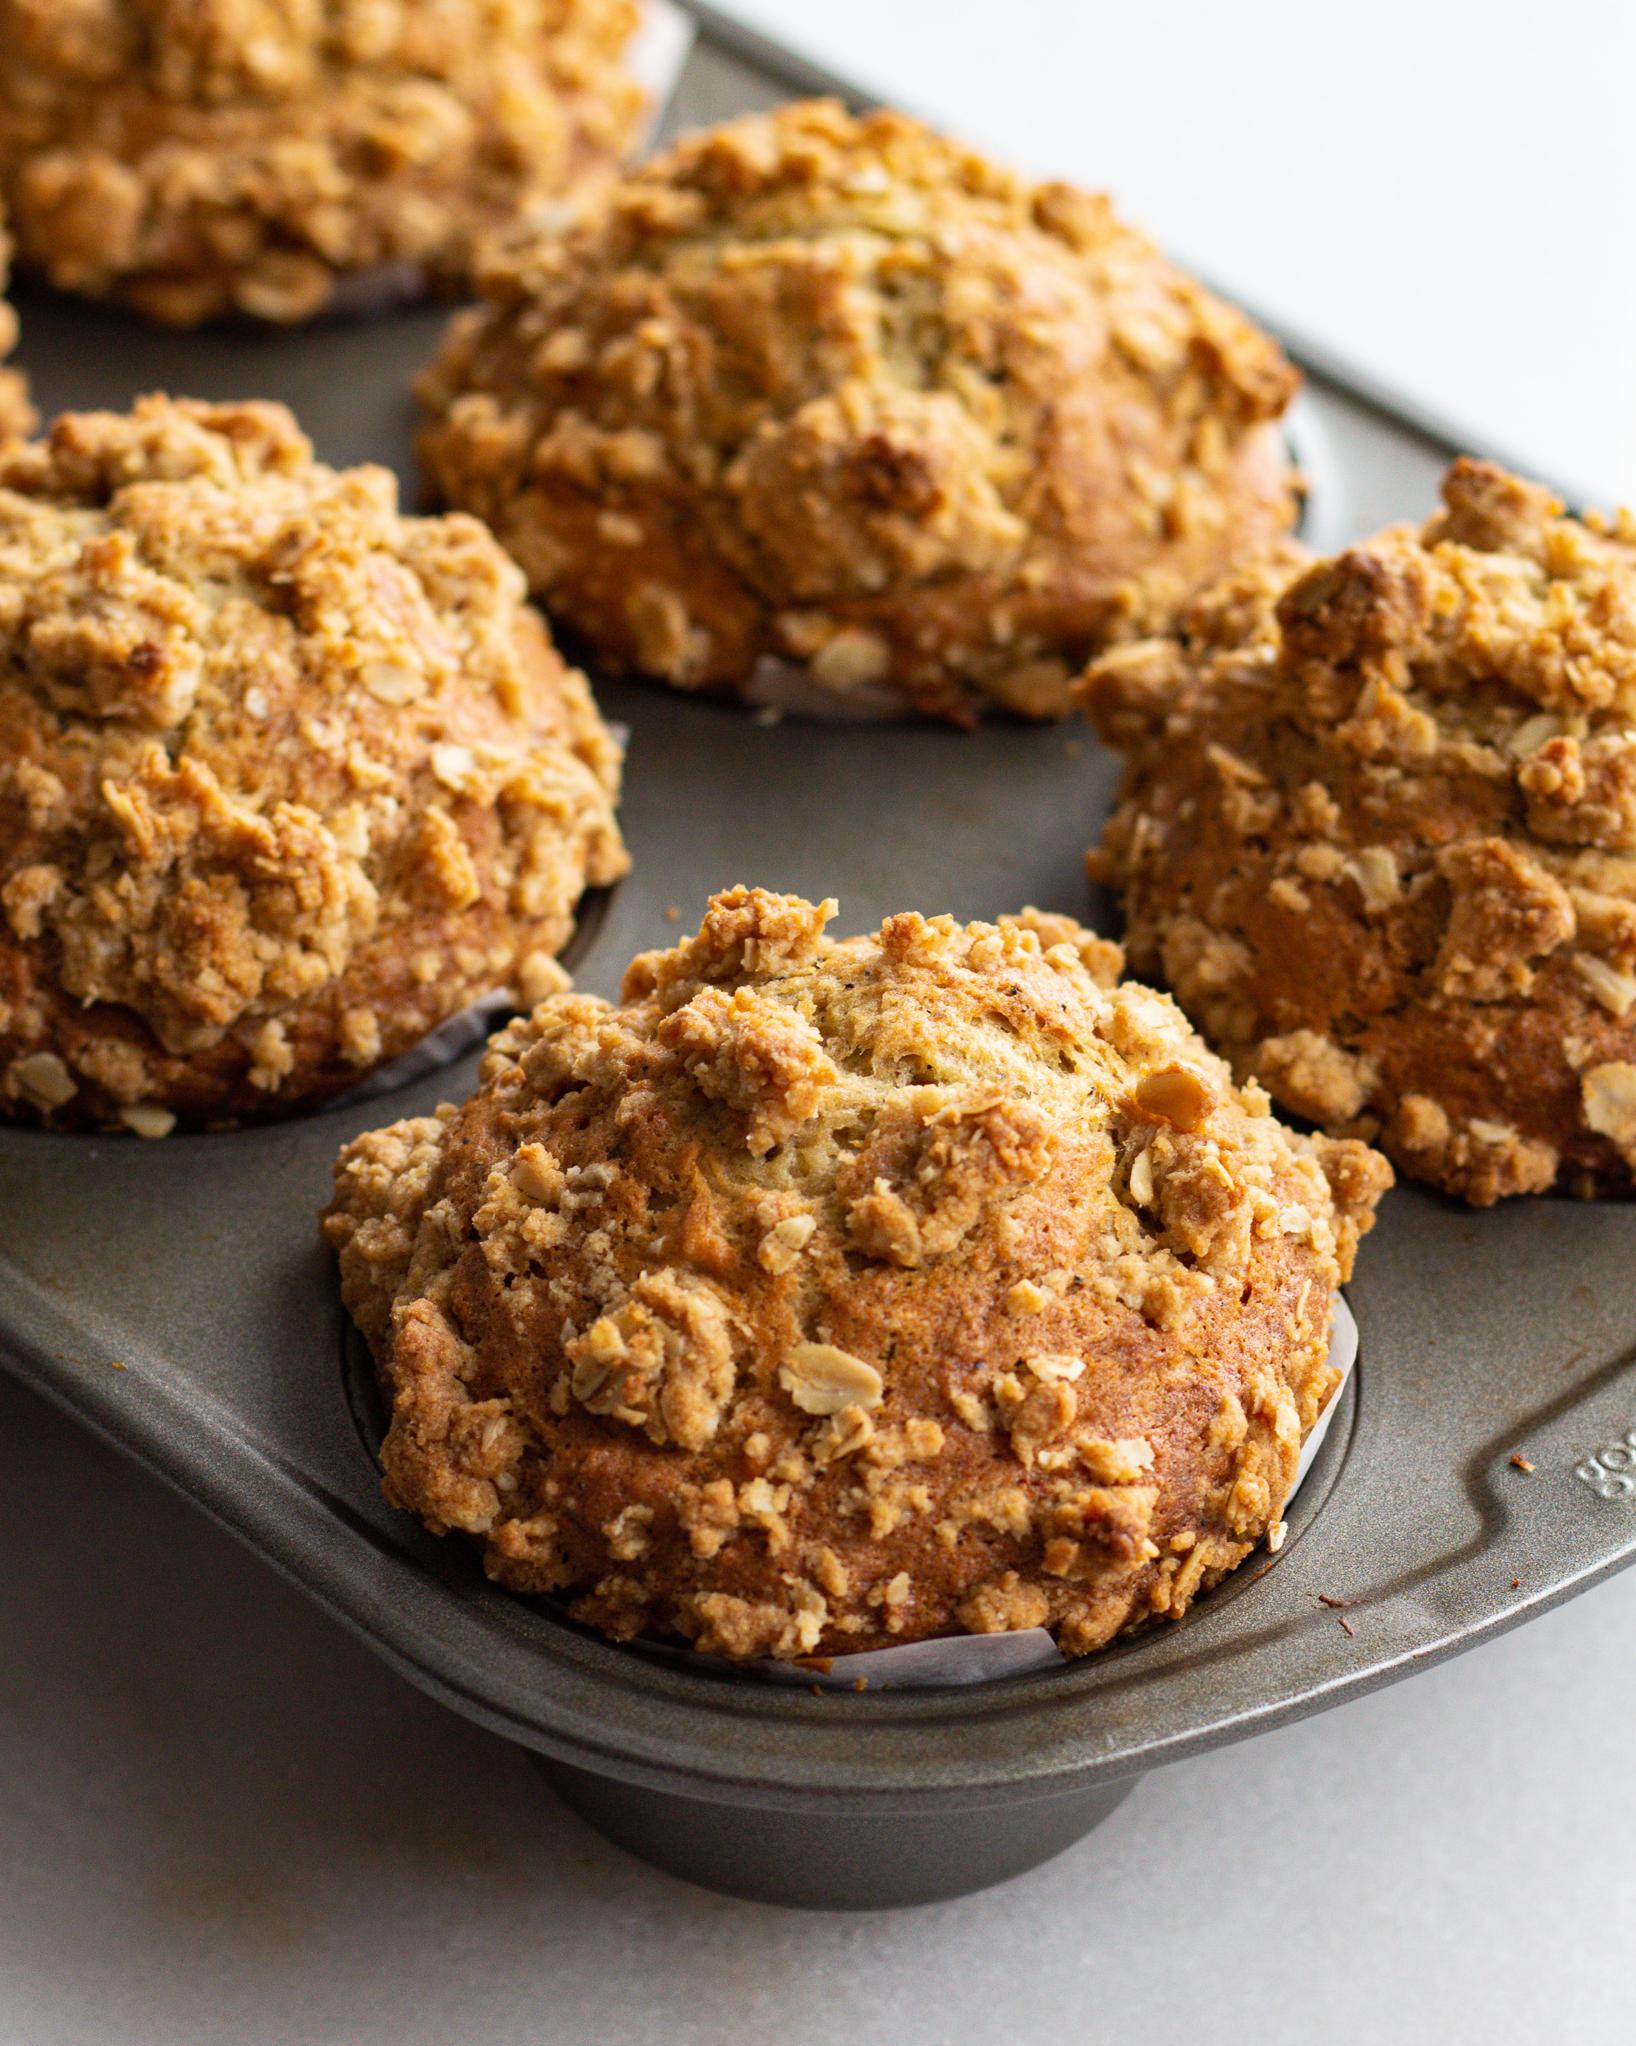  Wake up and smell the banana coffee muffins!